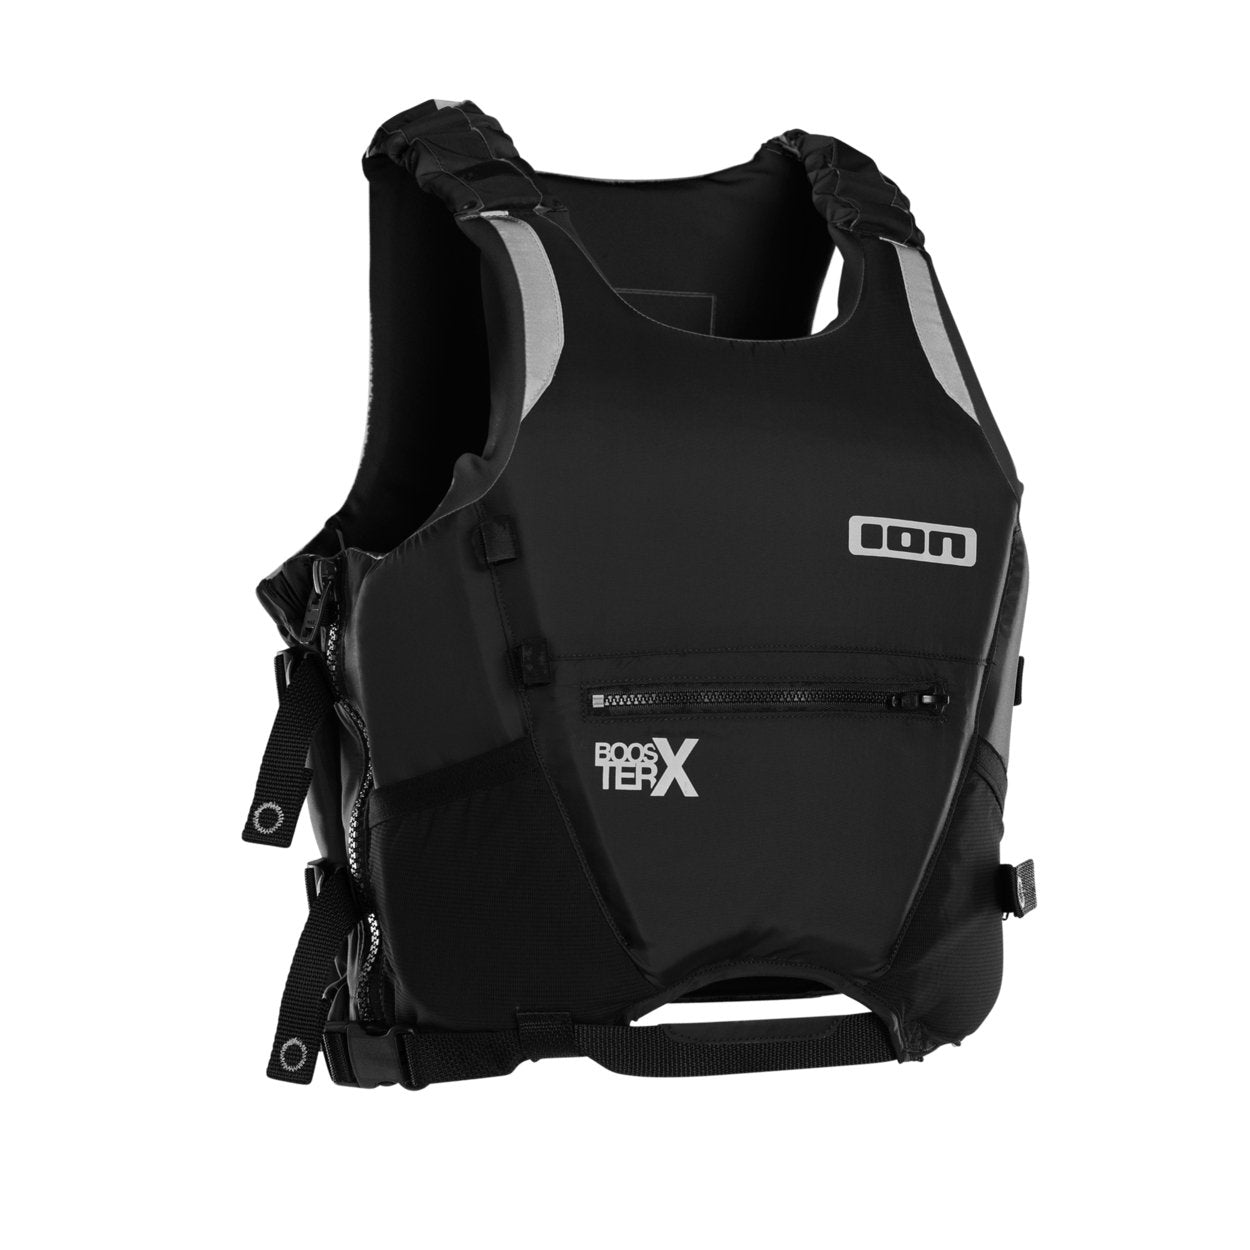 ION Booster Vest 50N SideZip unisex 2022 - Worthing Watersports - 9010583080130 - Protection - ION Water